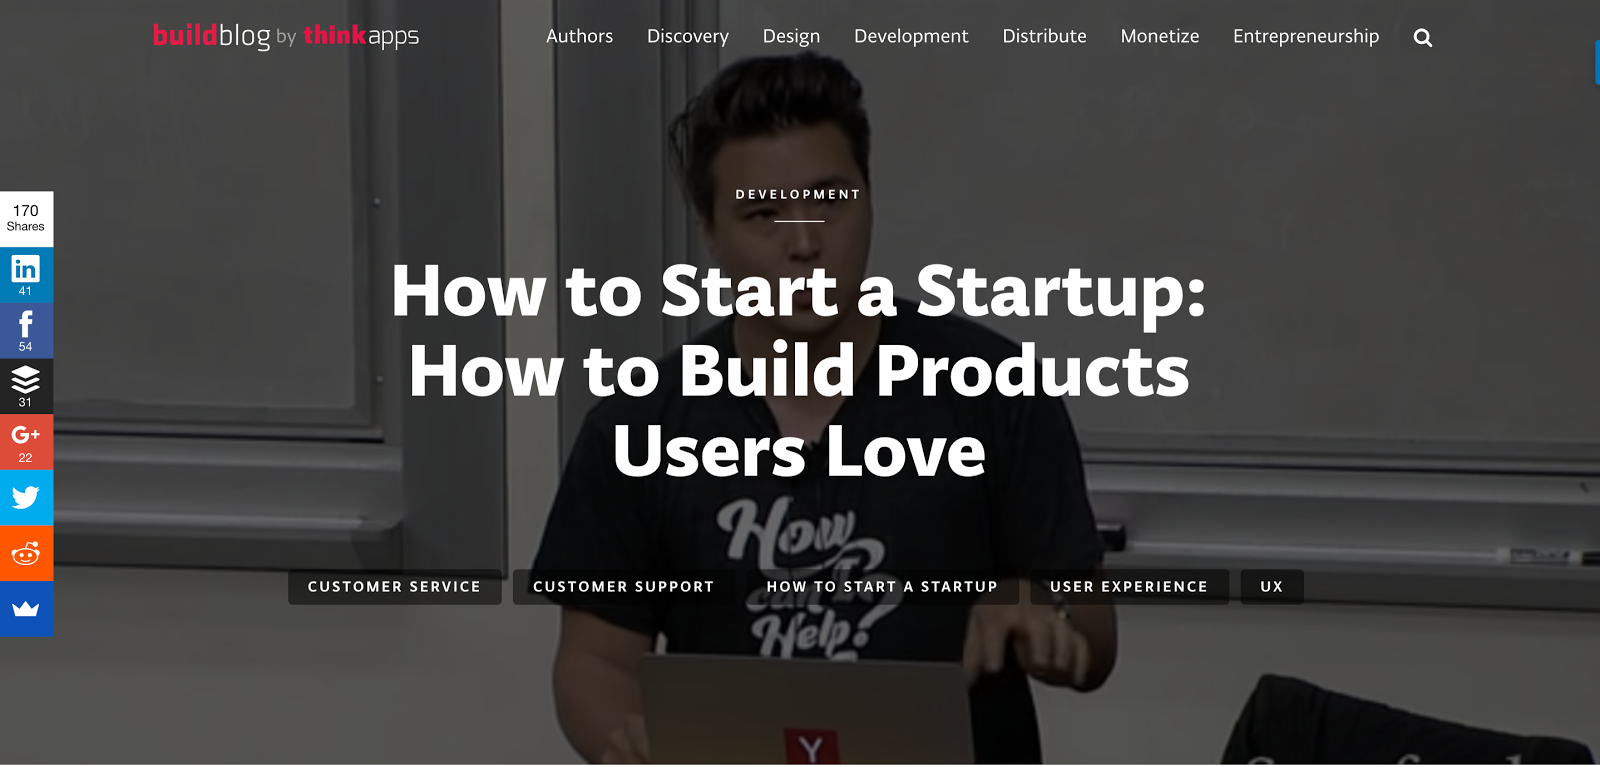 Create products users love YC 1